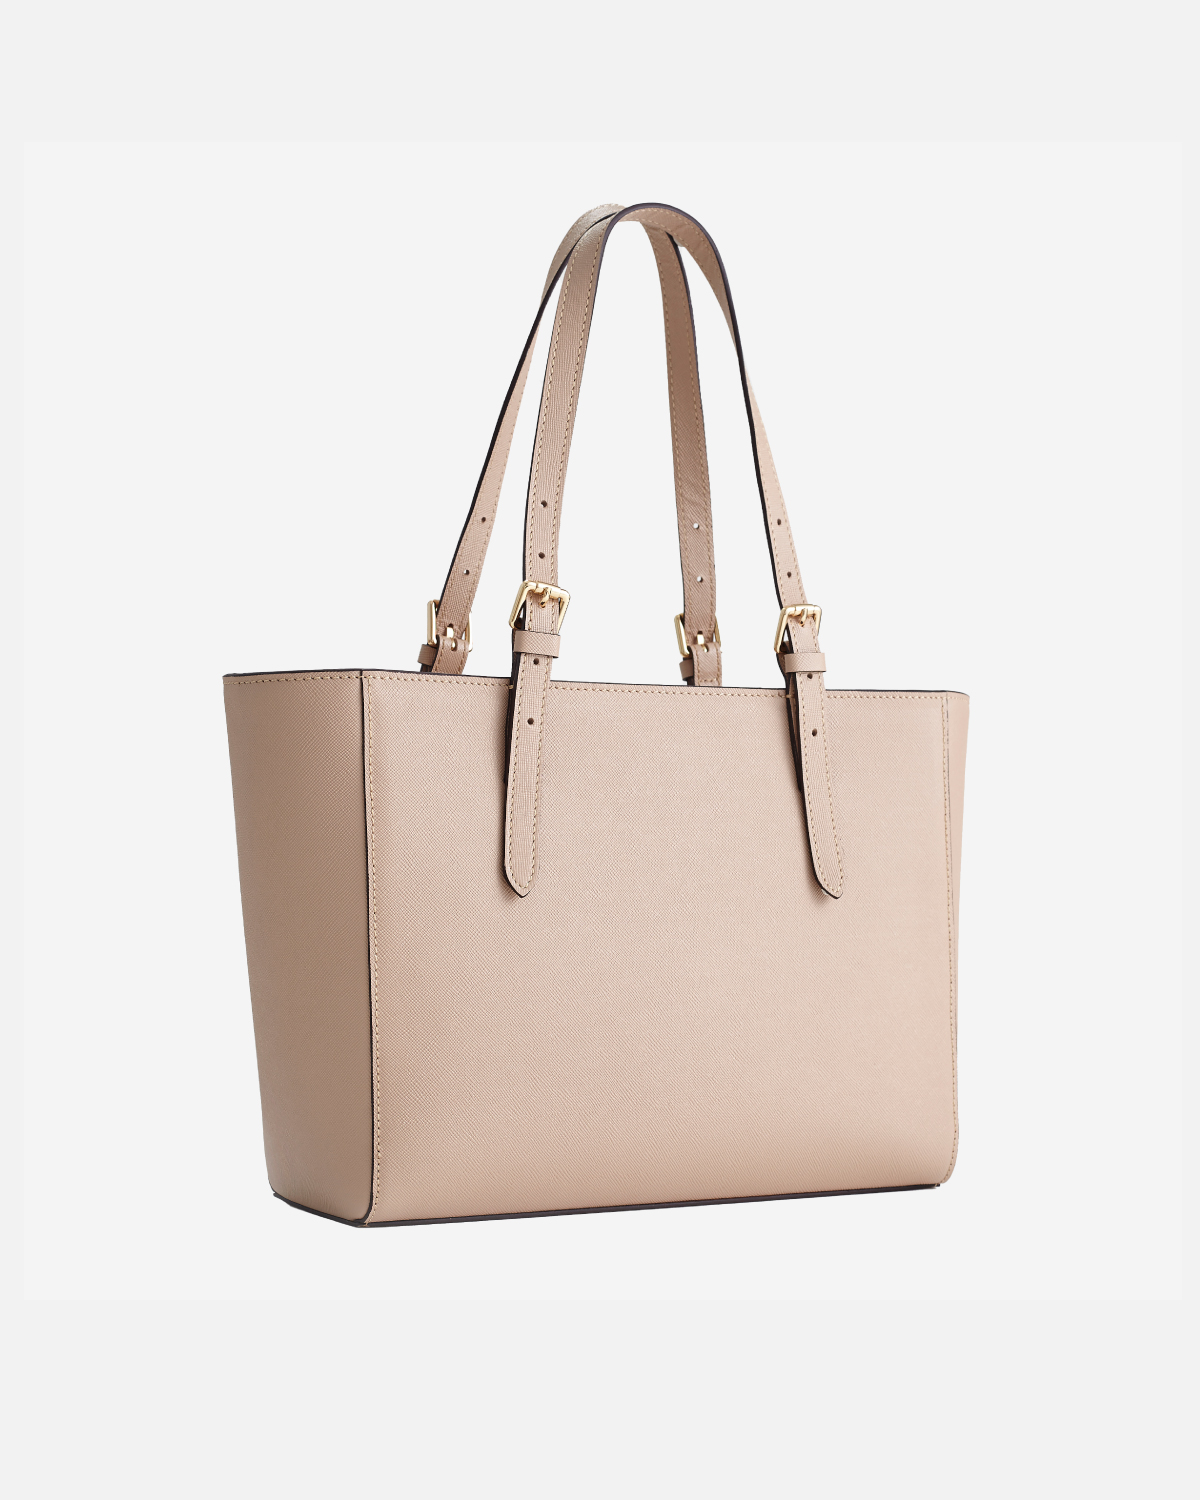 VERA The First Bag in Nude